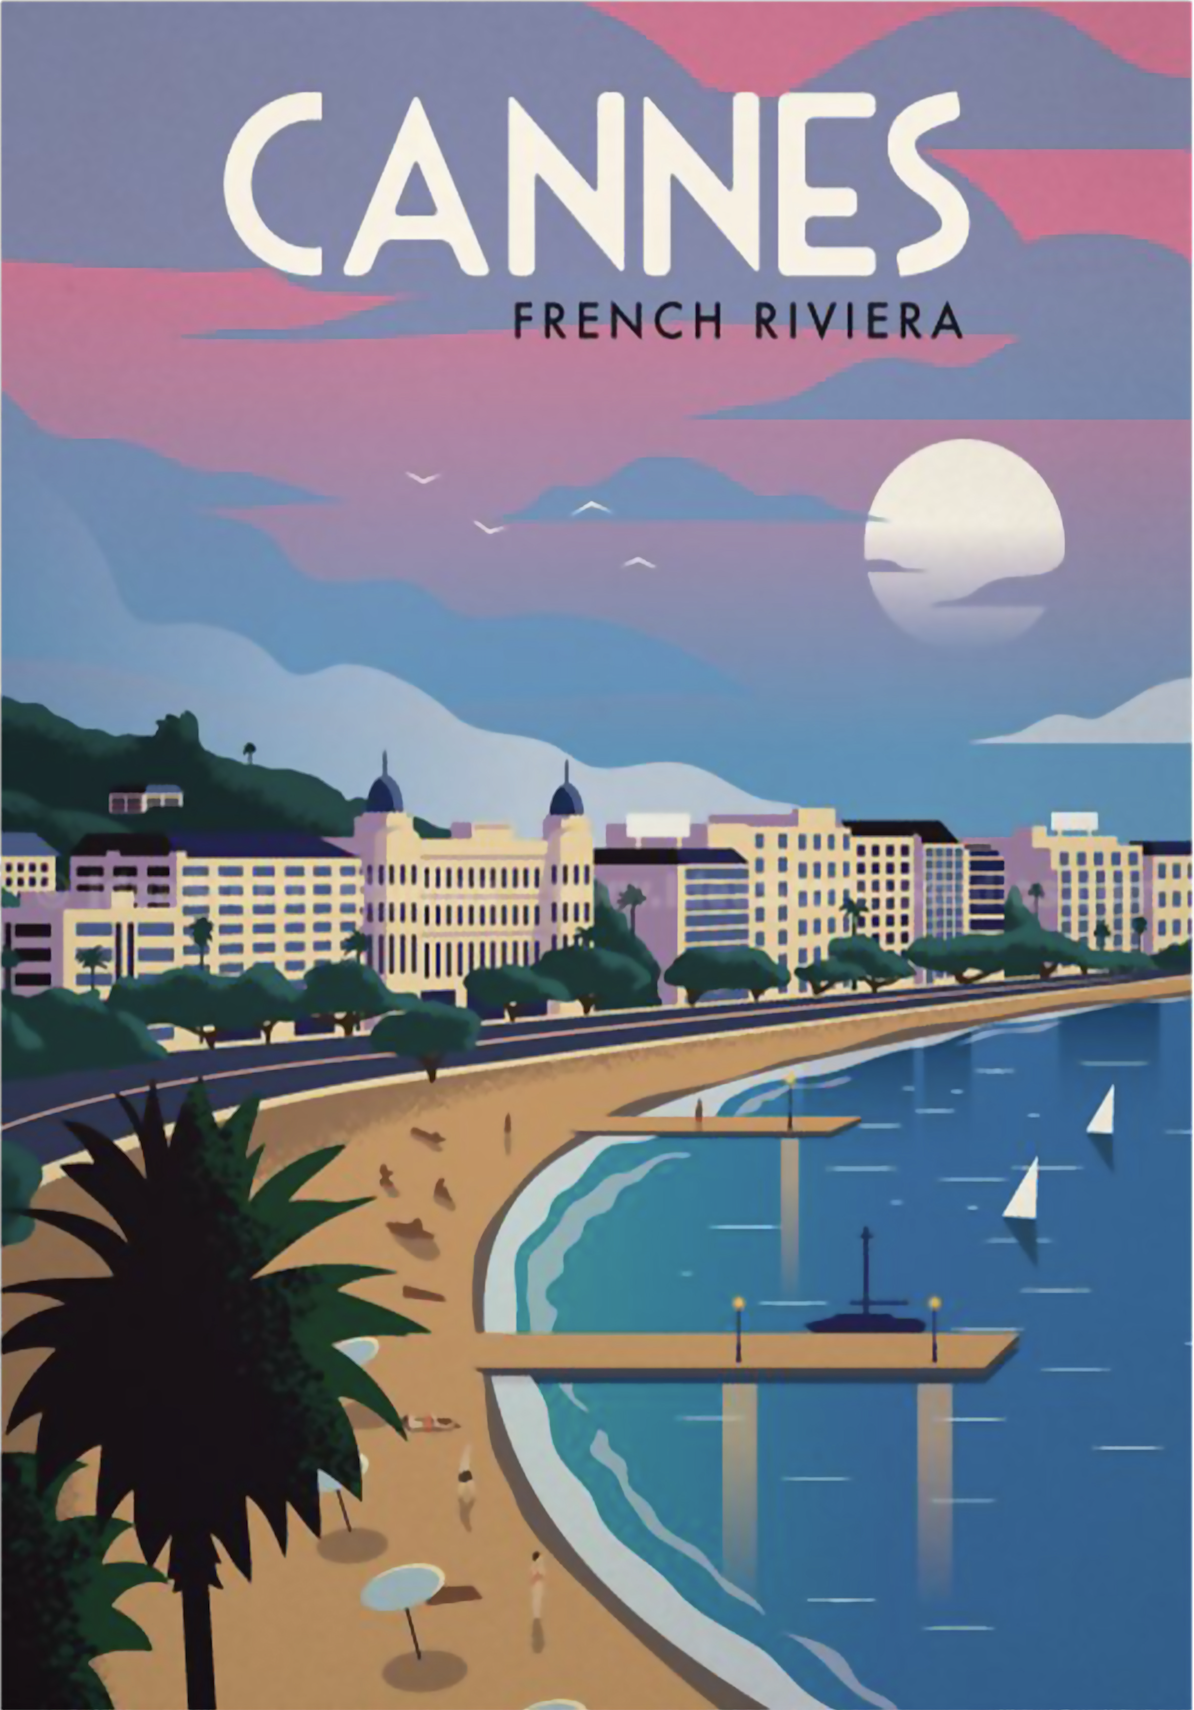 Cannes Travel Poster - Image 2 of 2